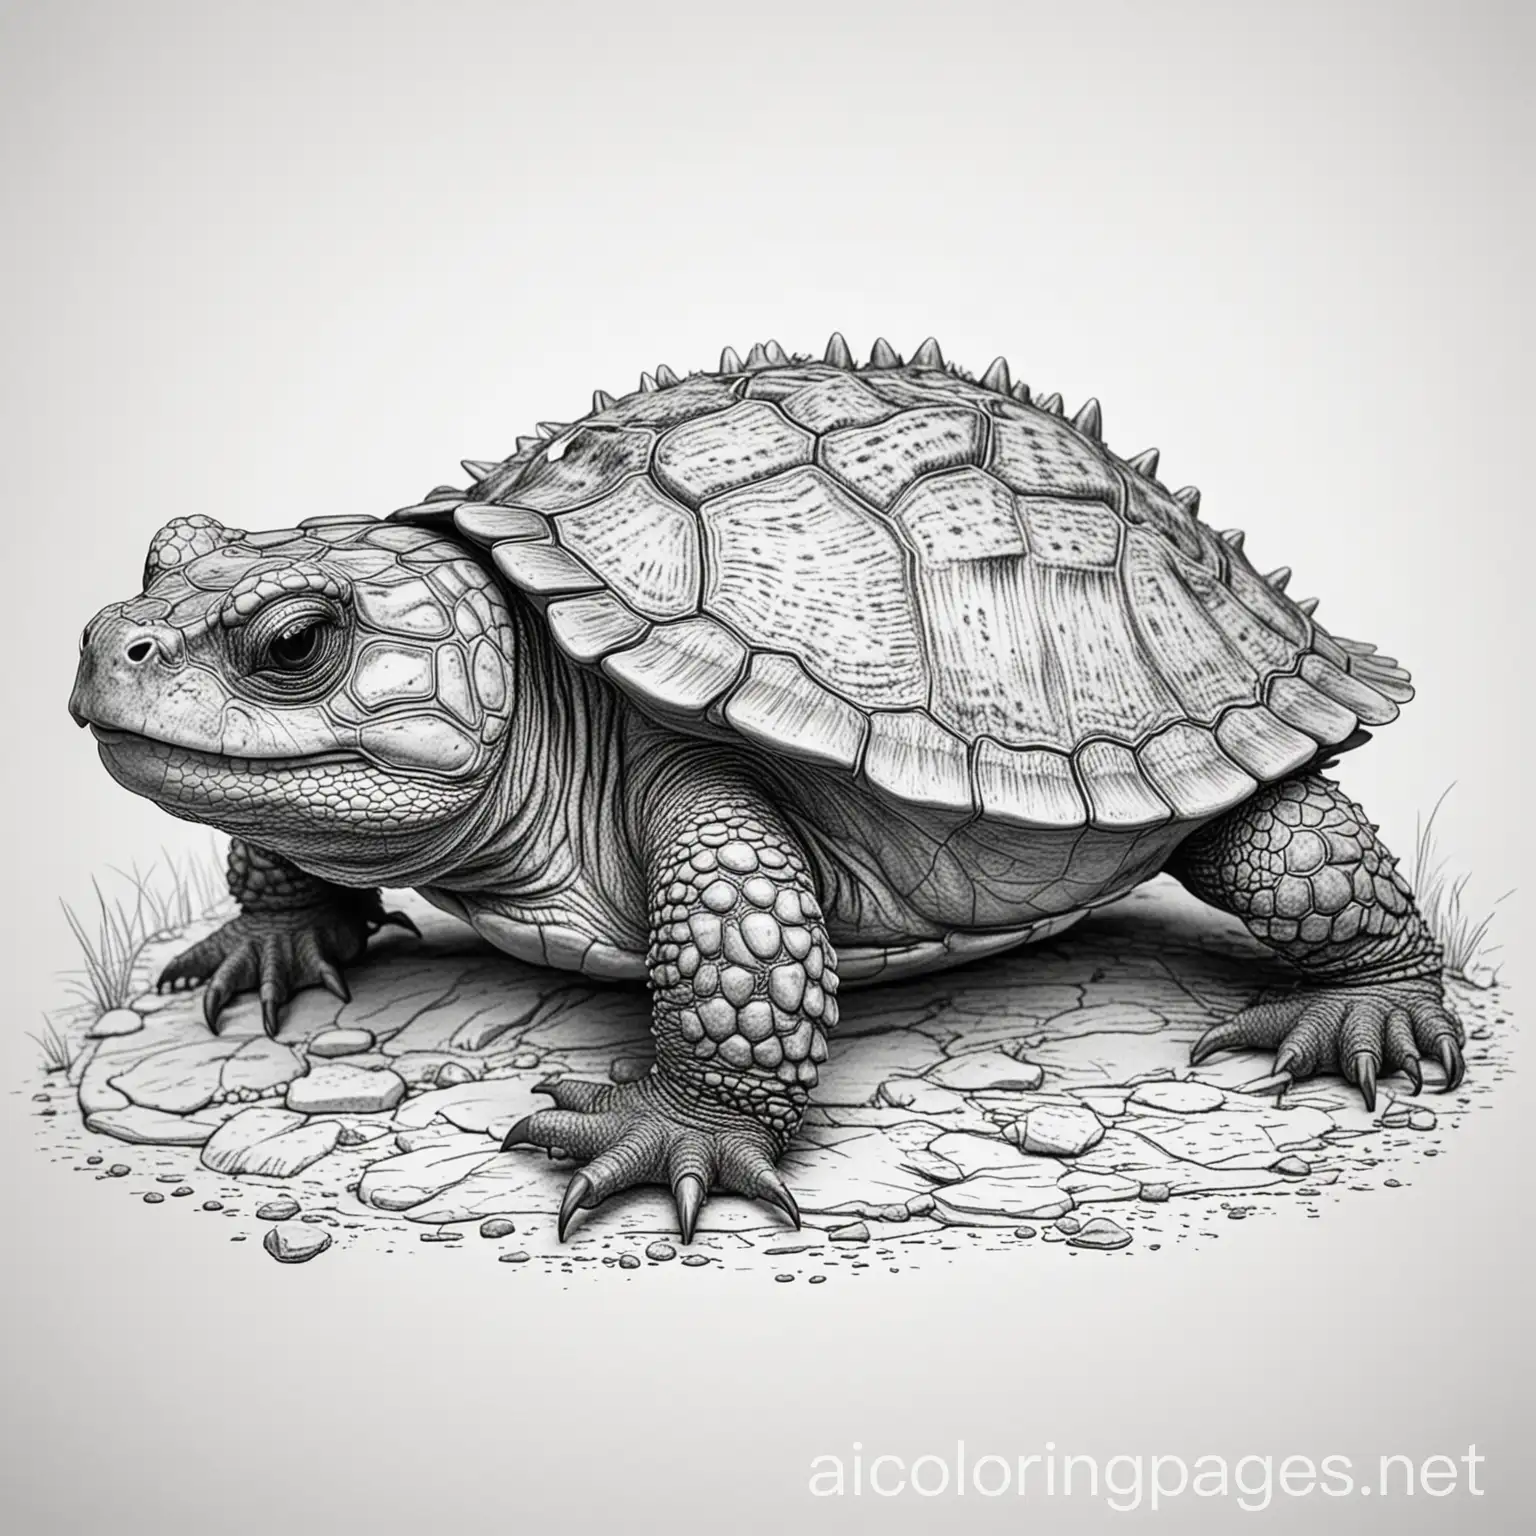 Baby-Alligator-and-Snapping-Turtle-Coloring-Page-Simple-Line-Art-on-White-Background